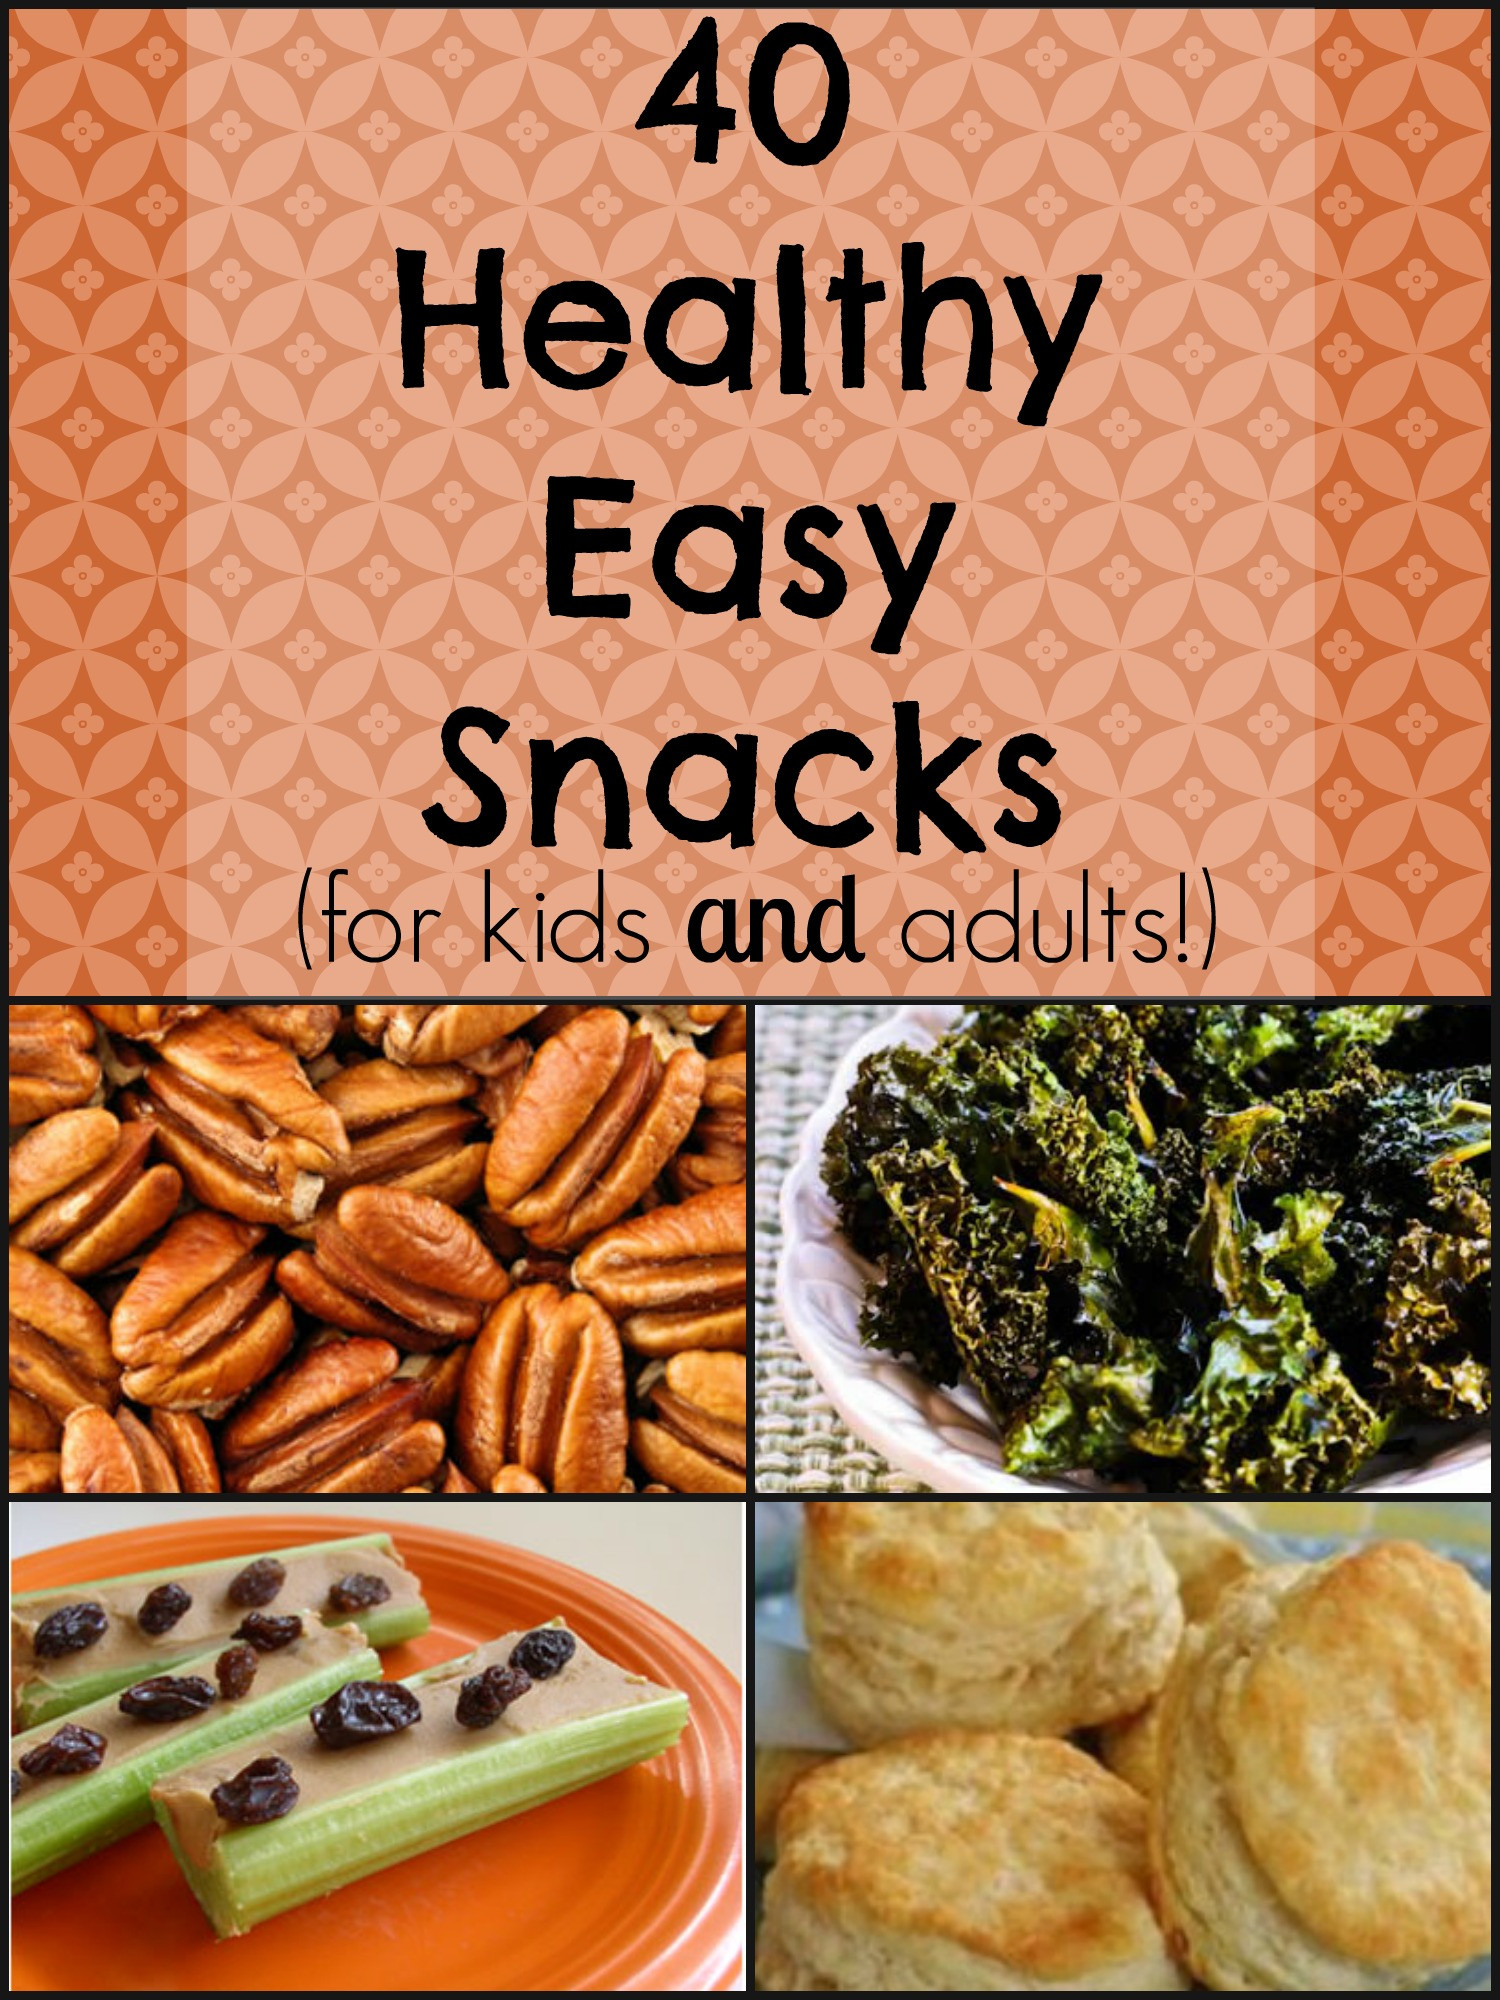 Easy And Healthy Snacks
 40 Healthy Easy Snacks for kids and adults 